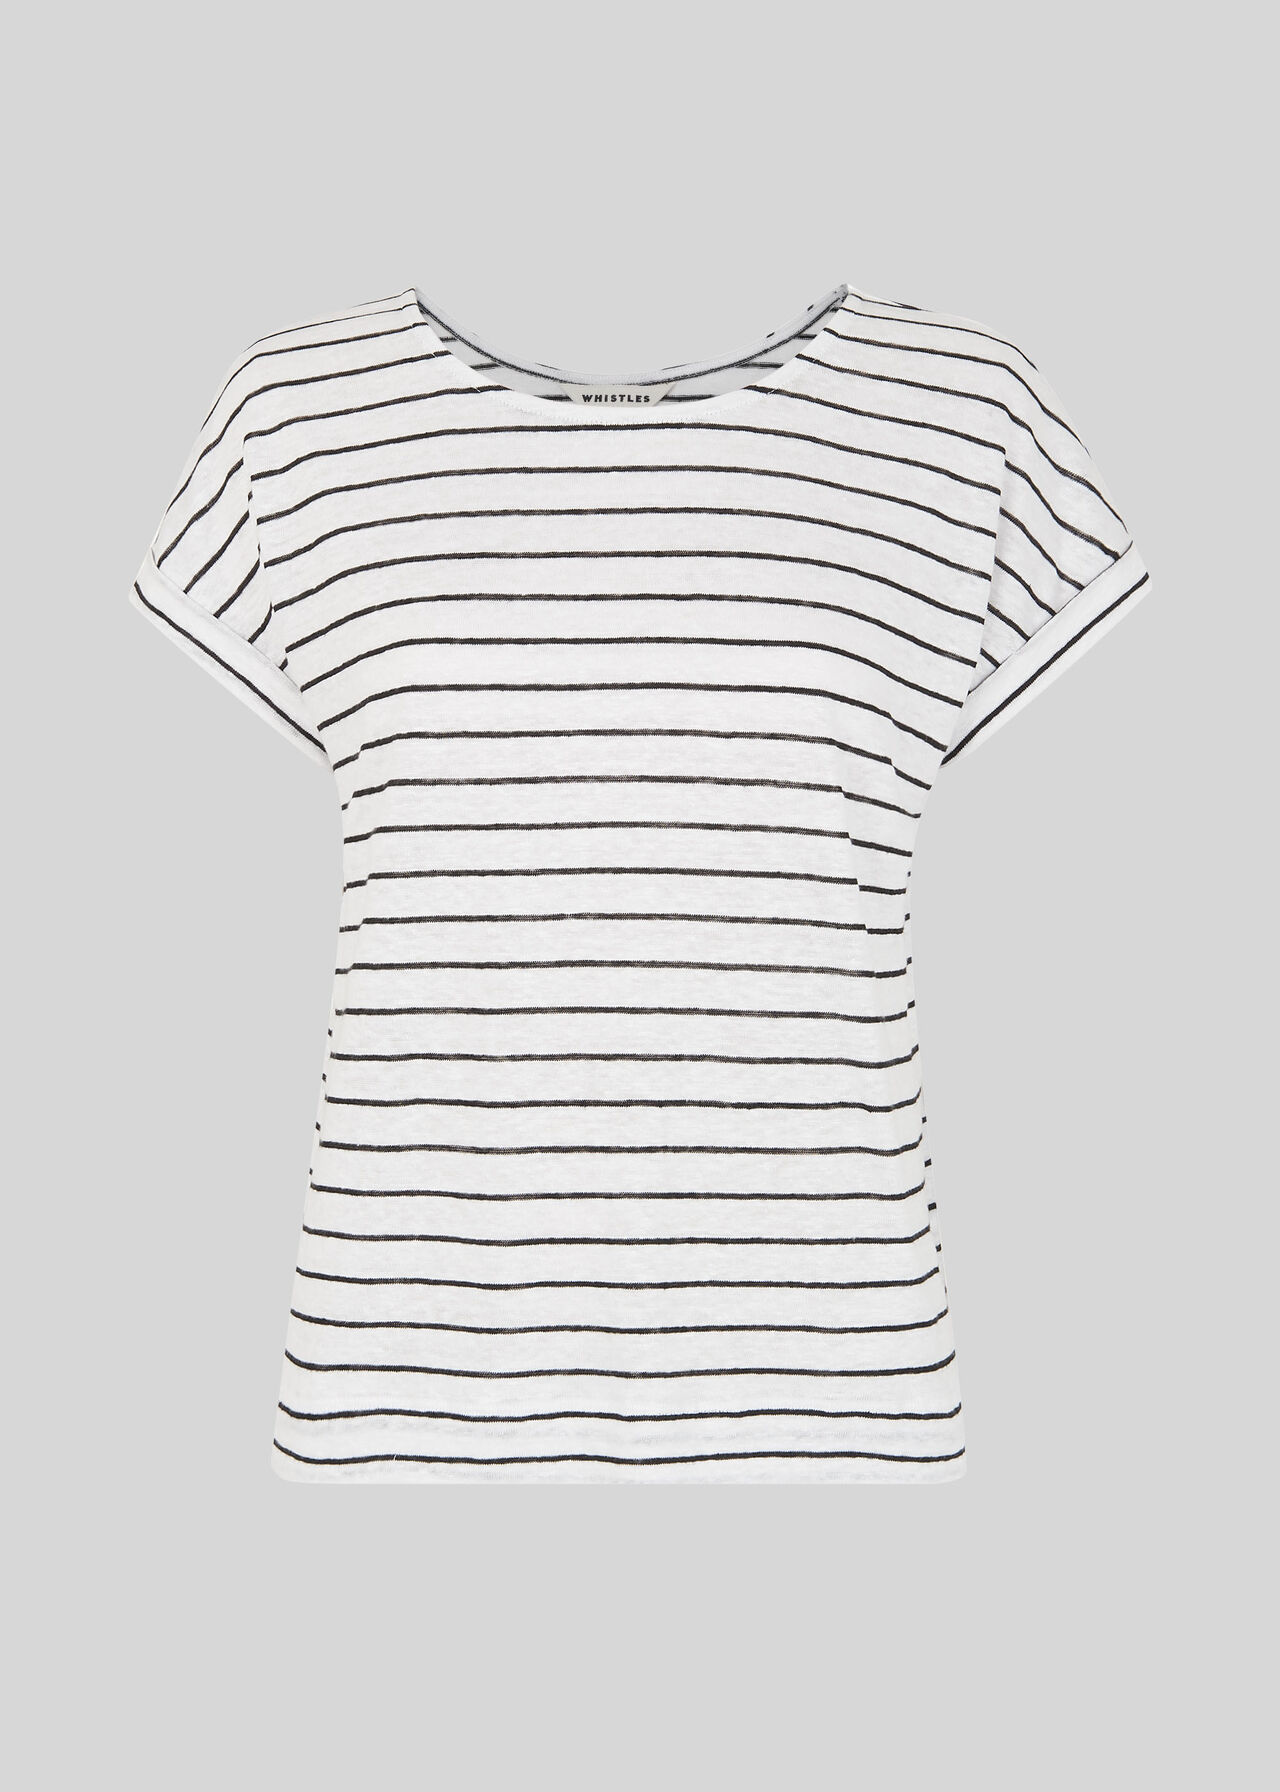 Stripe Relaxed Linen Tee Black and White